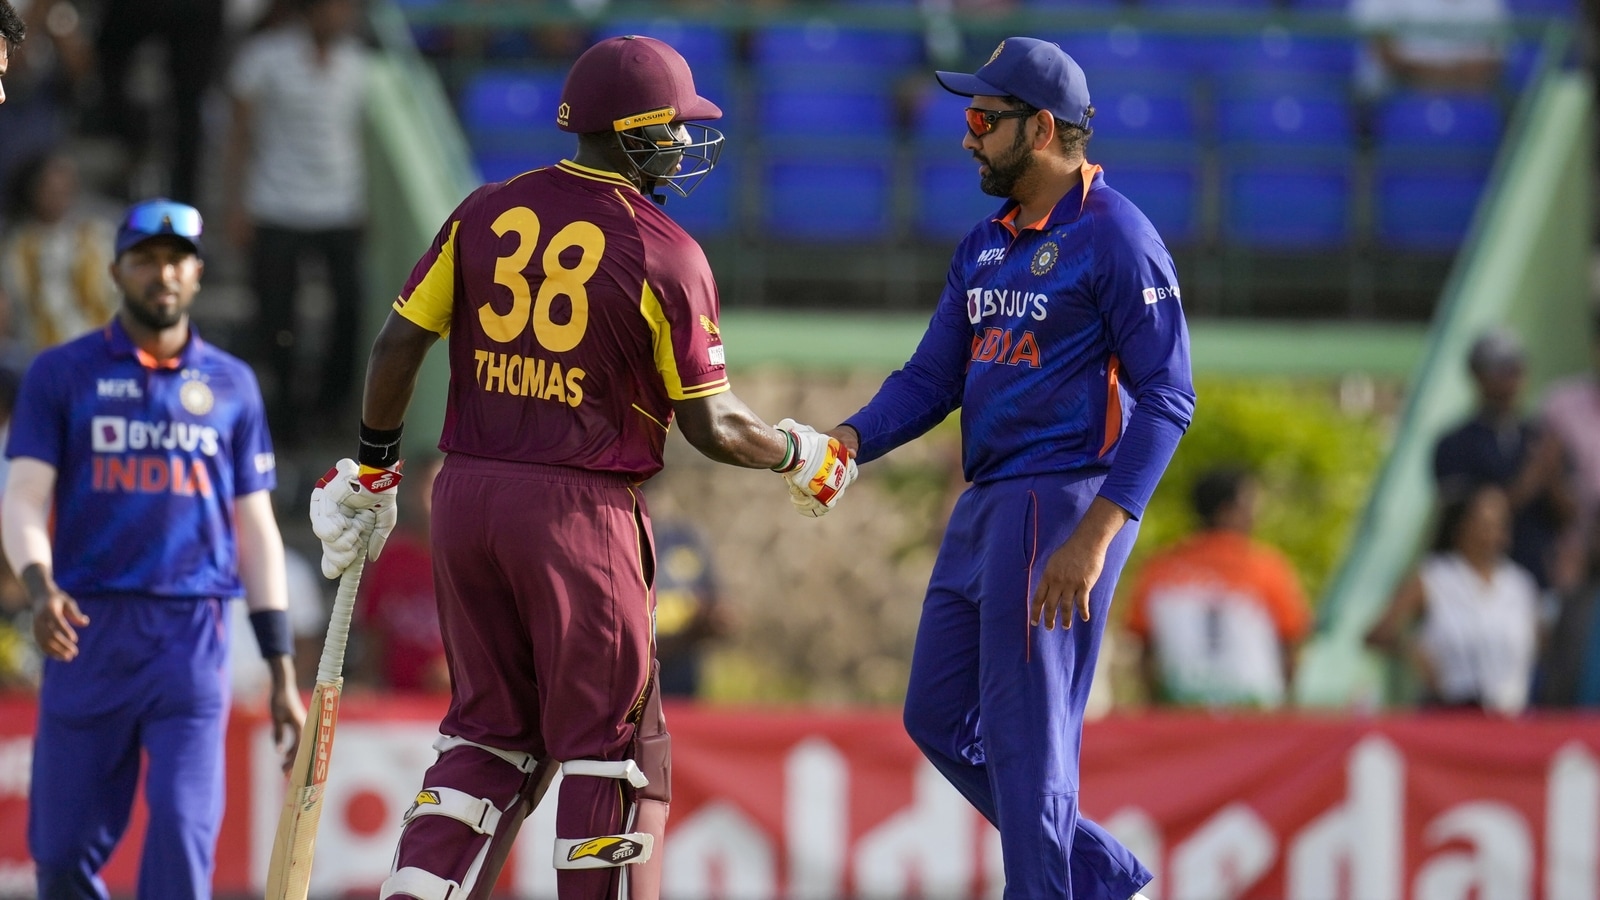 india west indies 20 match live video